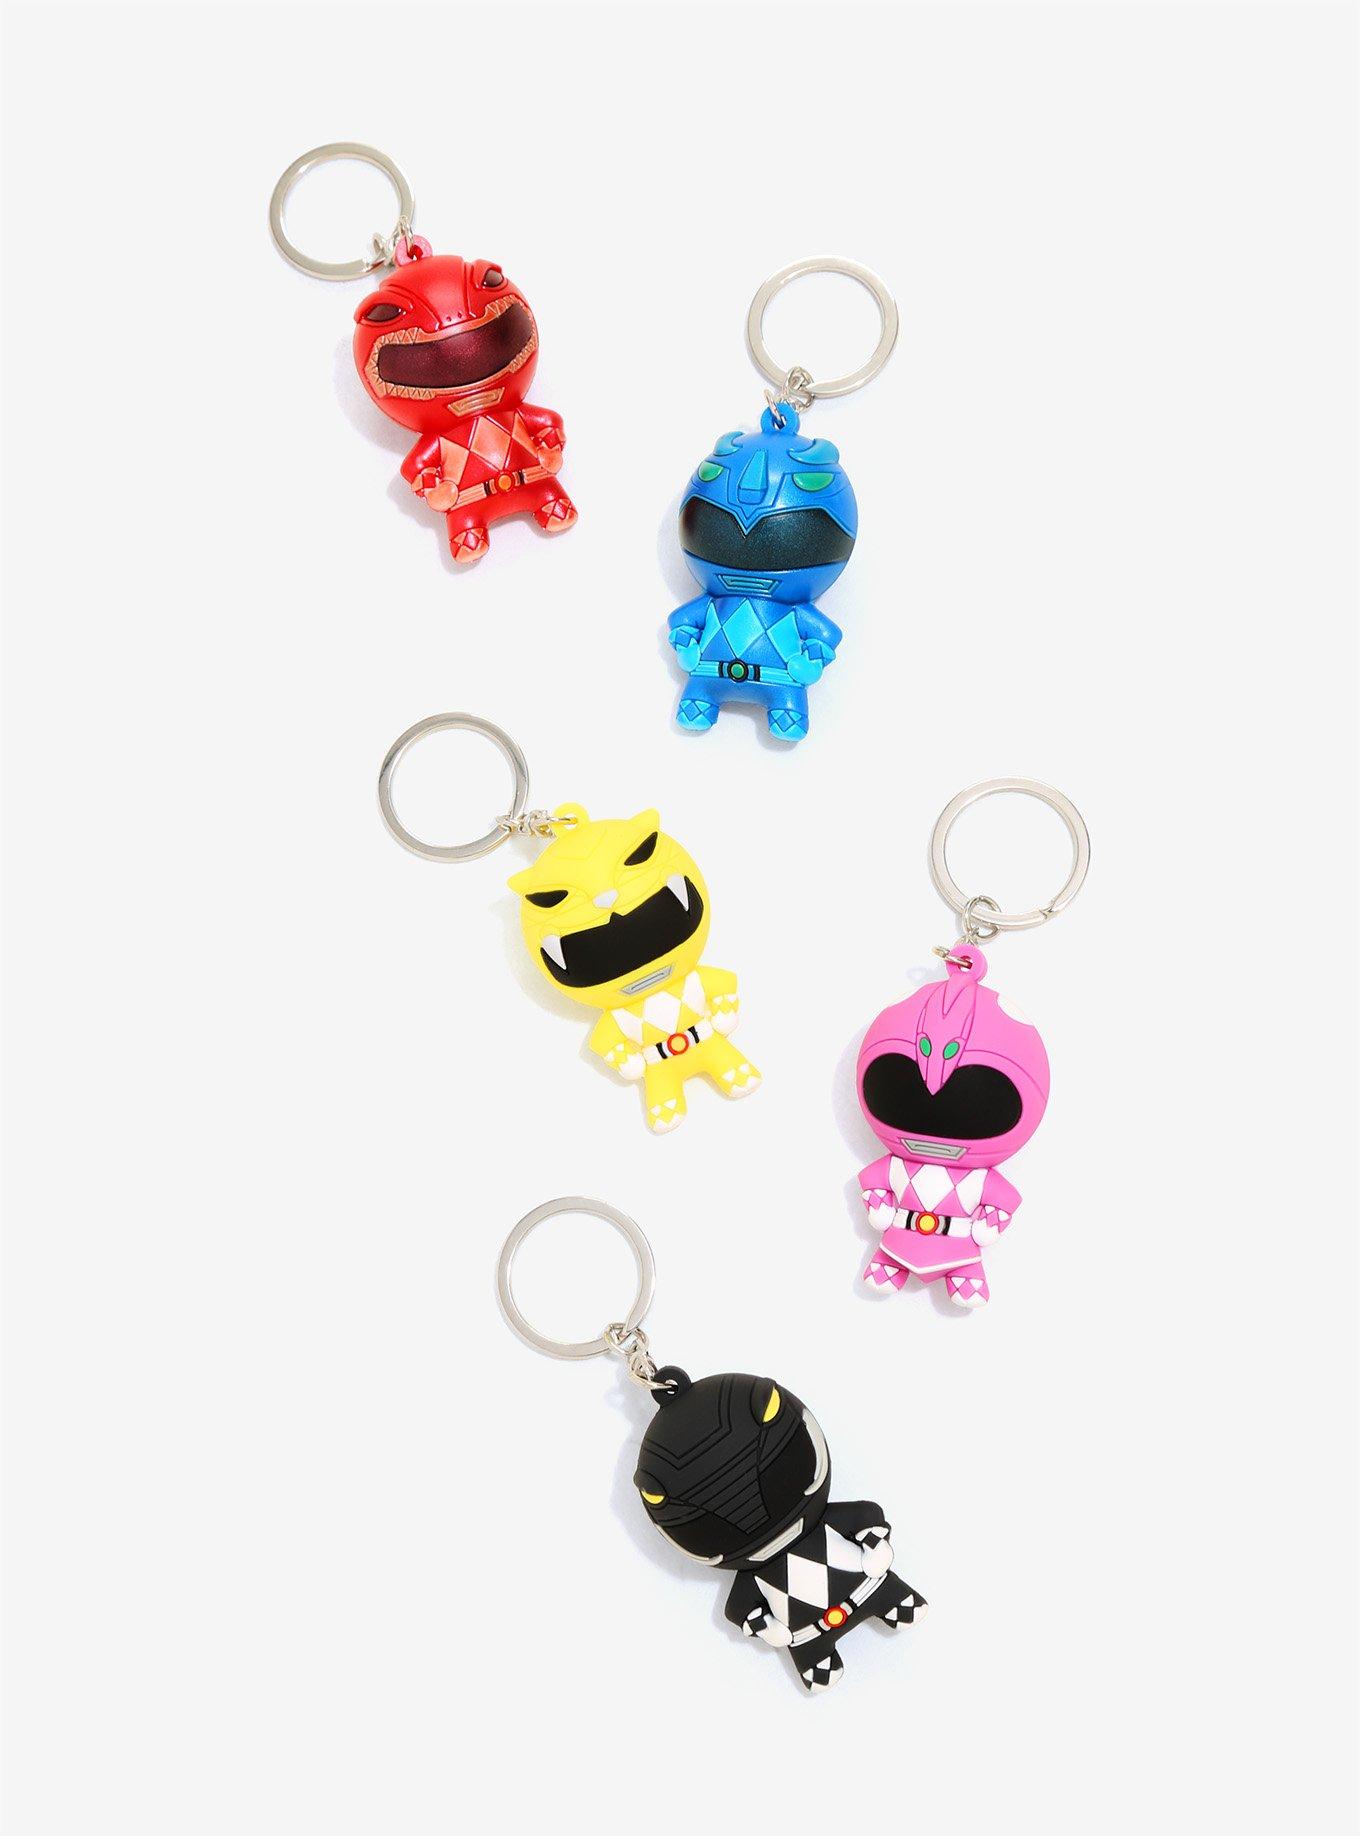 Mighty Morphin Blind Bag Keychain Yellow Ranger Key Chain Details about   Power Rangers NEW 